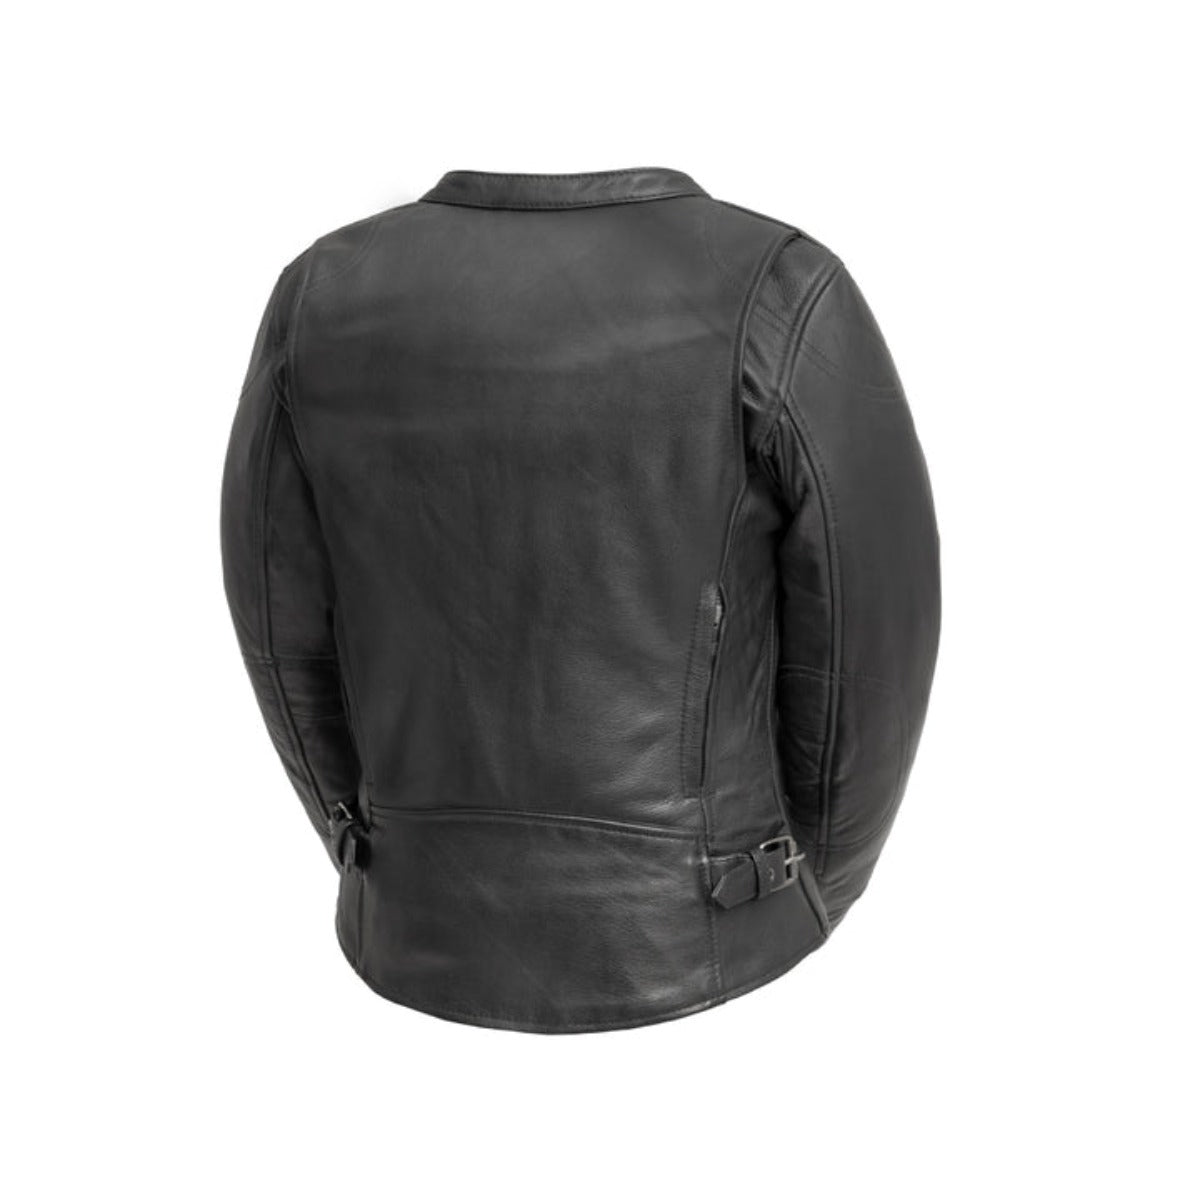 First Manufacturing Competition - Women's Leather Motorcycle Jacket